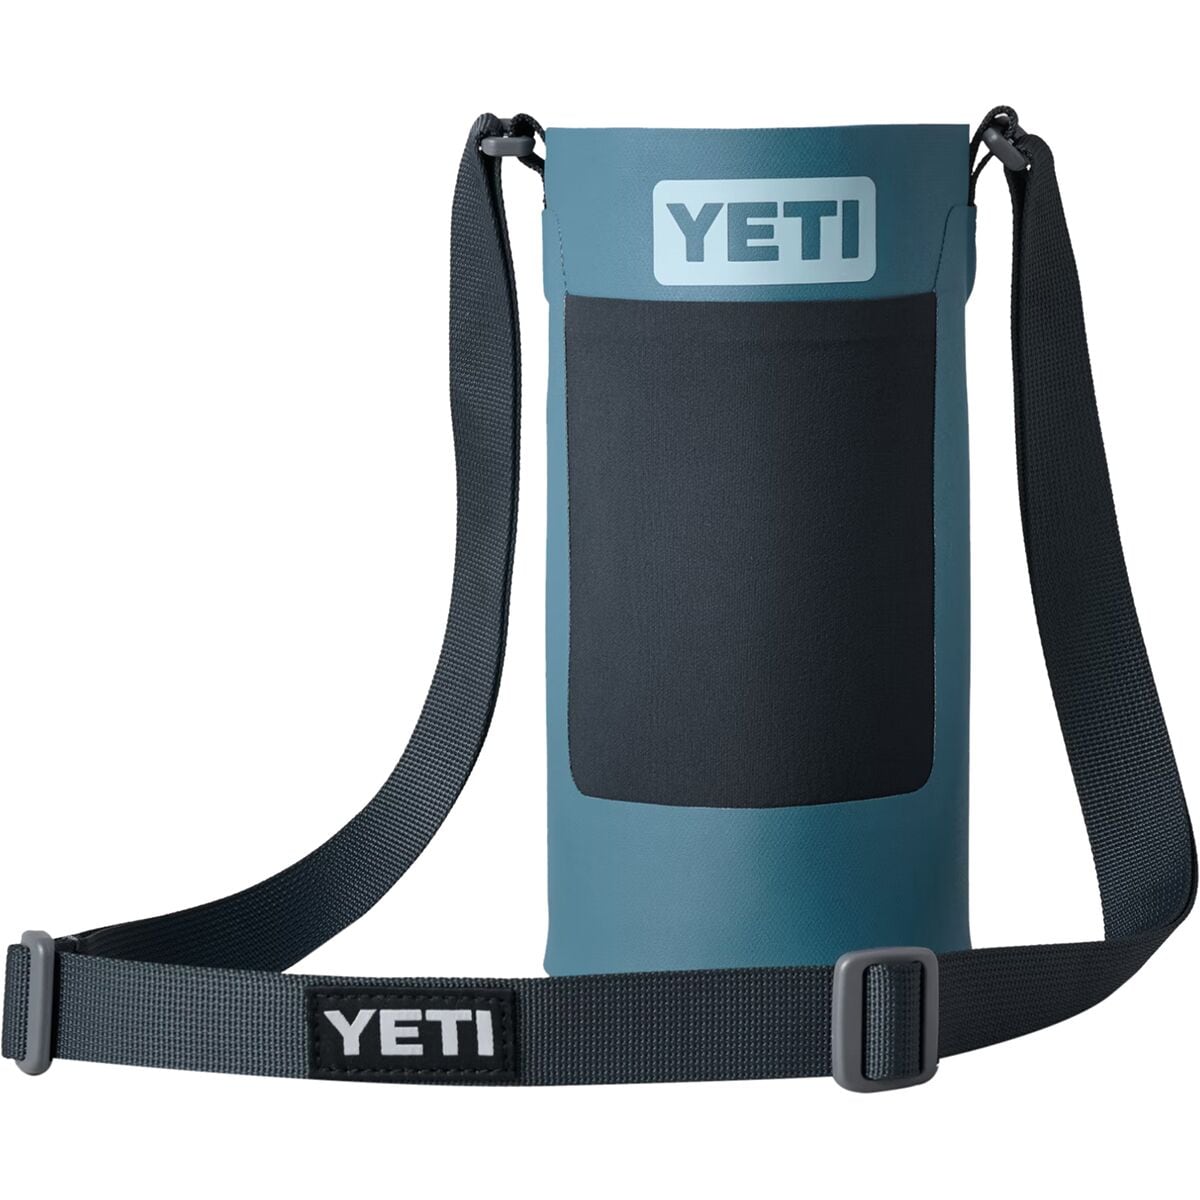 https://www.backcountry.com/images/items/1200/YET/YETZ017/NORBLU.jpg?t=8566